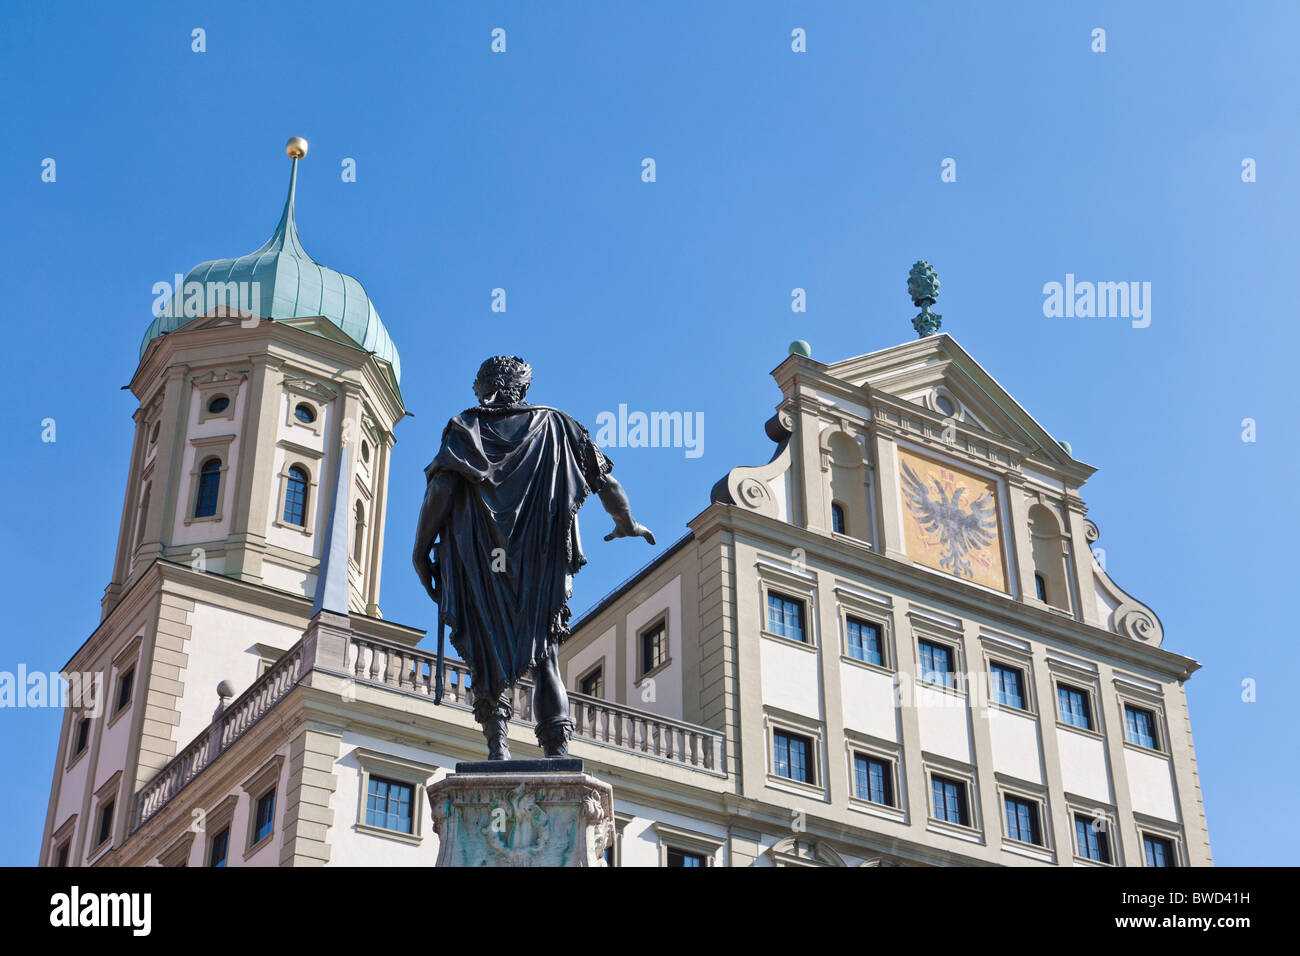 FIGURE ON A FOUNTAIN, AUGUSTUS FOUNTAIN IN FRONT OF TOWN HALL, AUGSBURG, BAVARIA, GERMANY Stock Photo